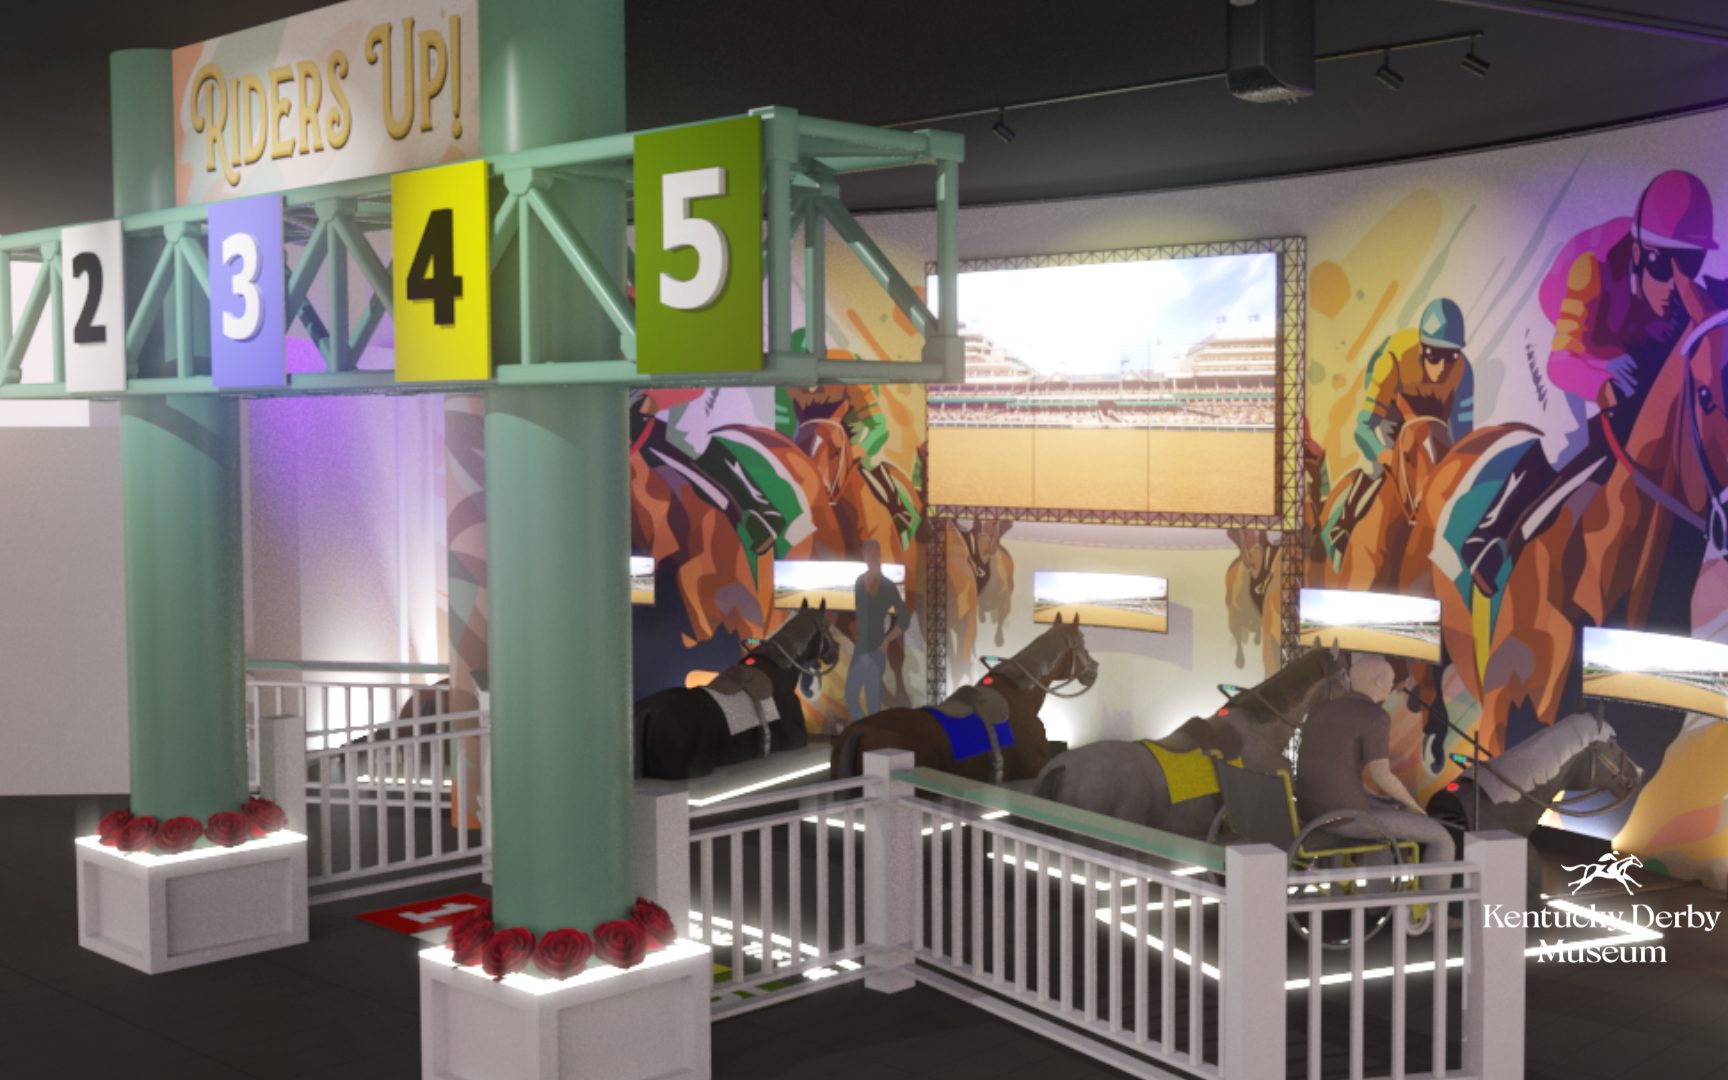 Kentucky Derby Museum gallops into the future with $1 million Riders Up! exhibit upgrade